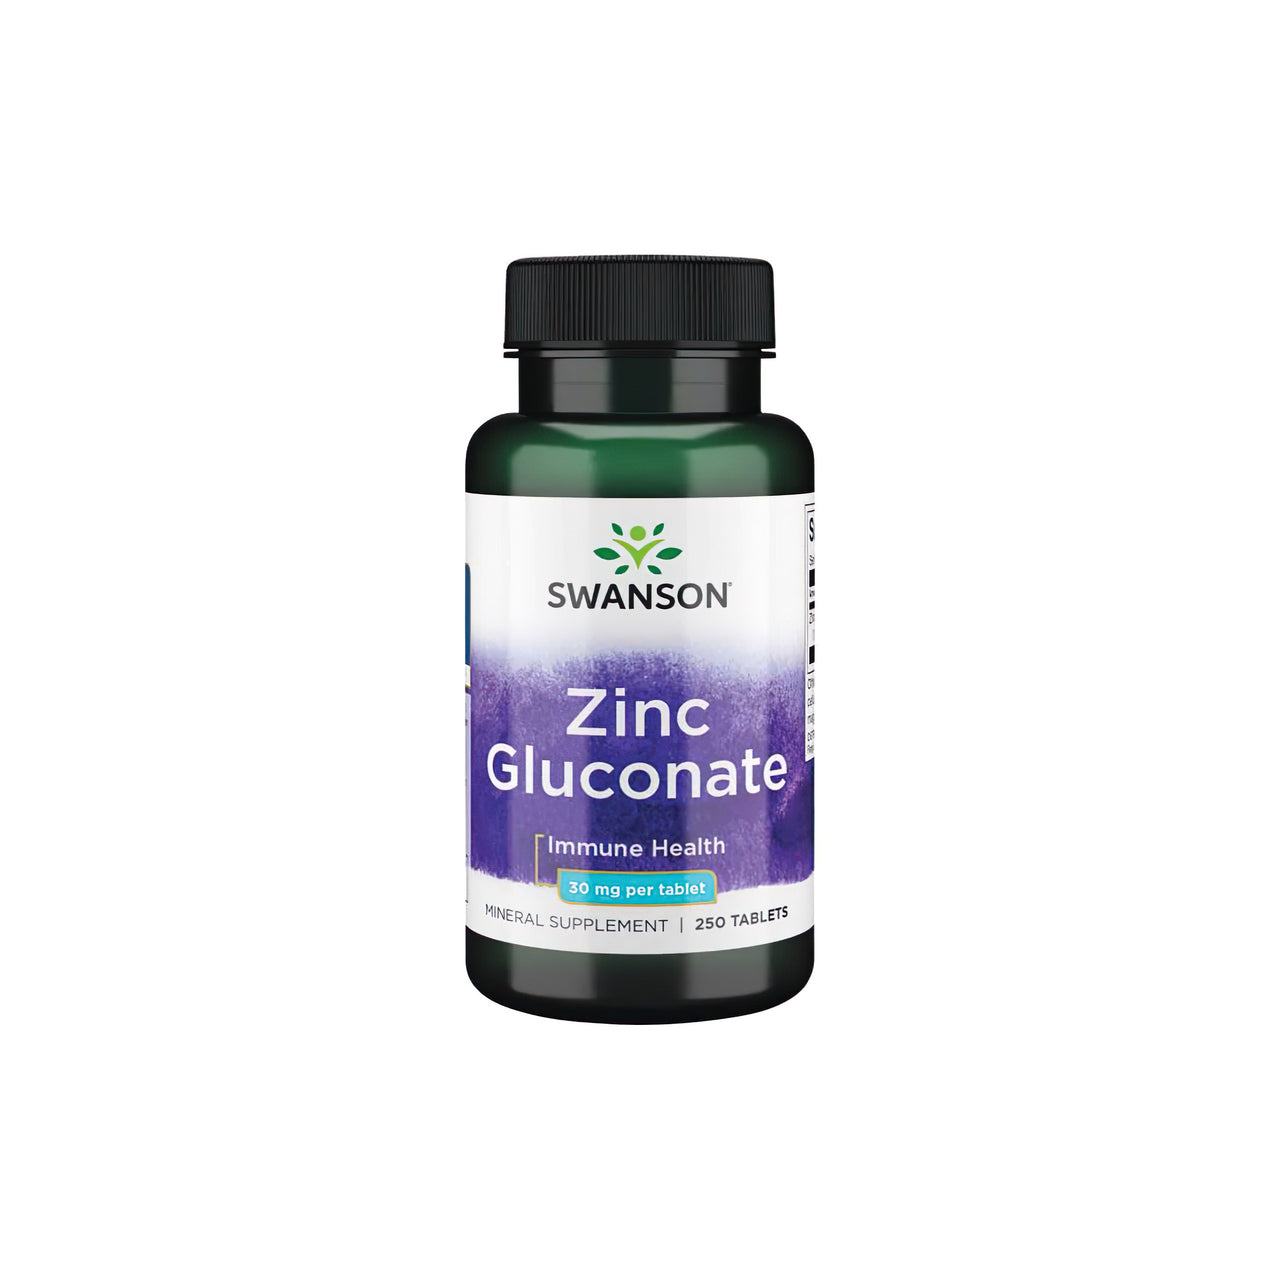 Bottle of Swanson Zinc Gluconate 30 mg 250 Tablets dietary supplement for daily wellness, containing 250 tablets for immune health.